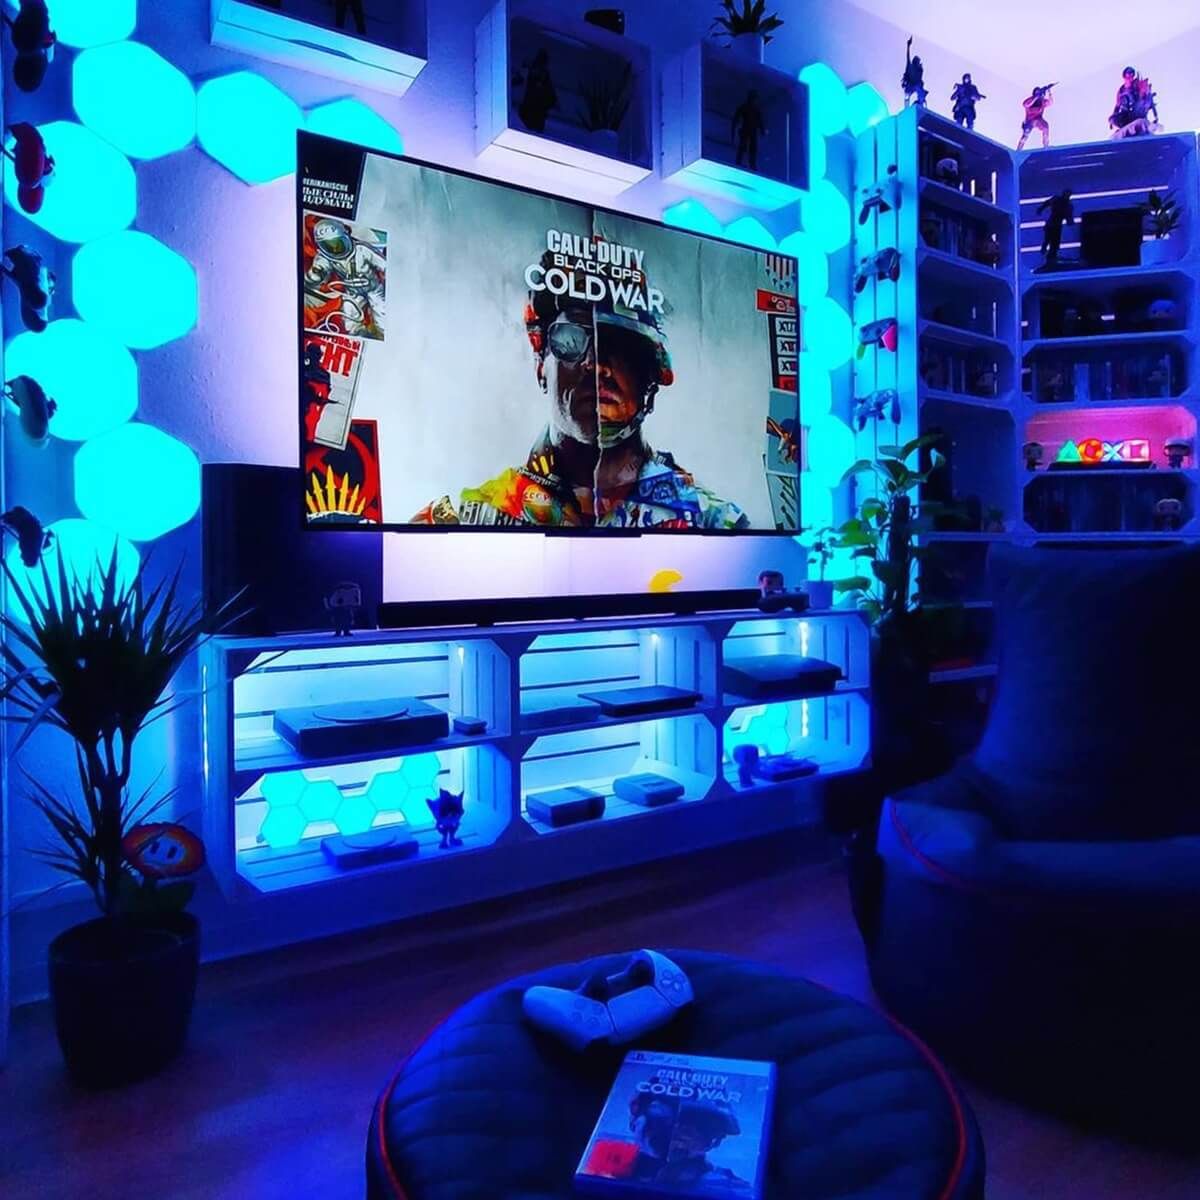 Best Gaming Entertainment Centers & Tv Stand Setup Ideas | Gridfiti With Regard To Rgb Entertainment Centers Black (Gallery 16 of 20)